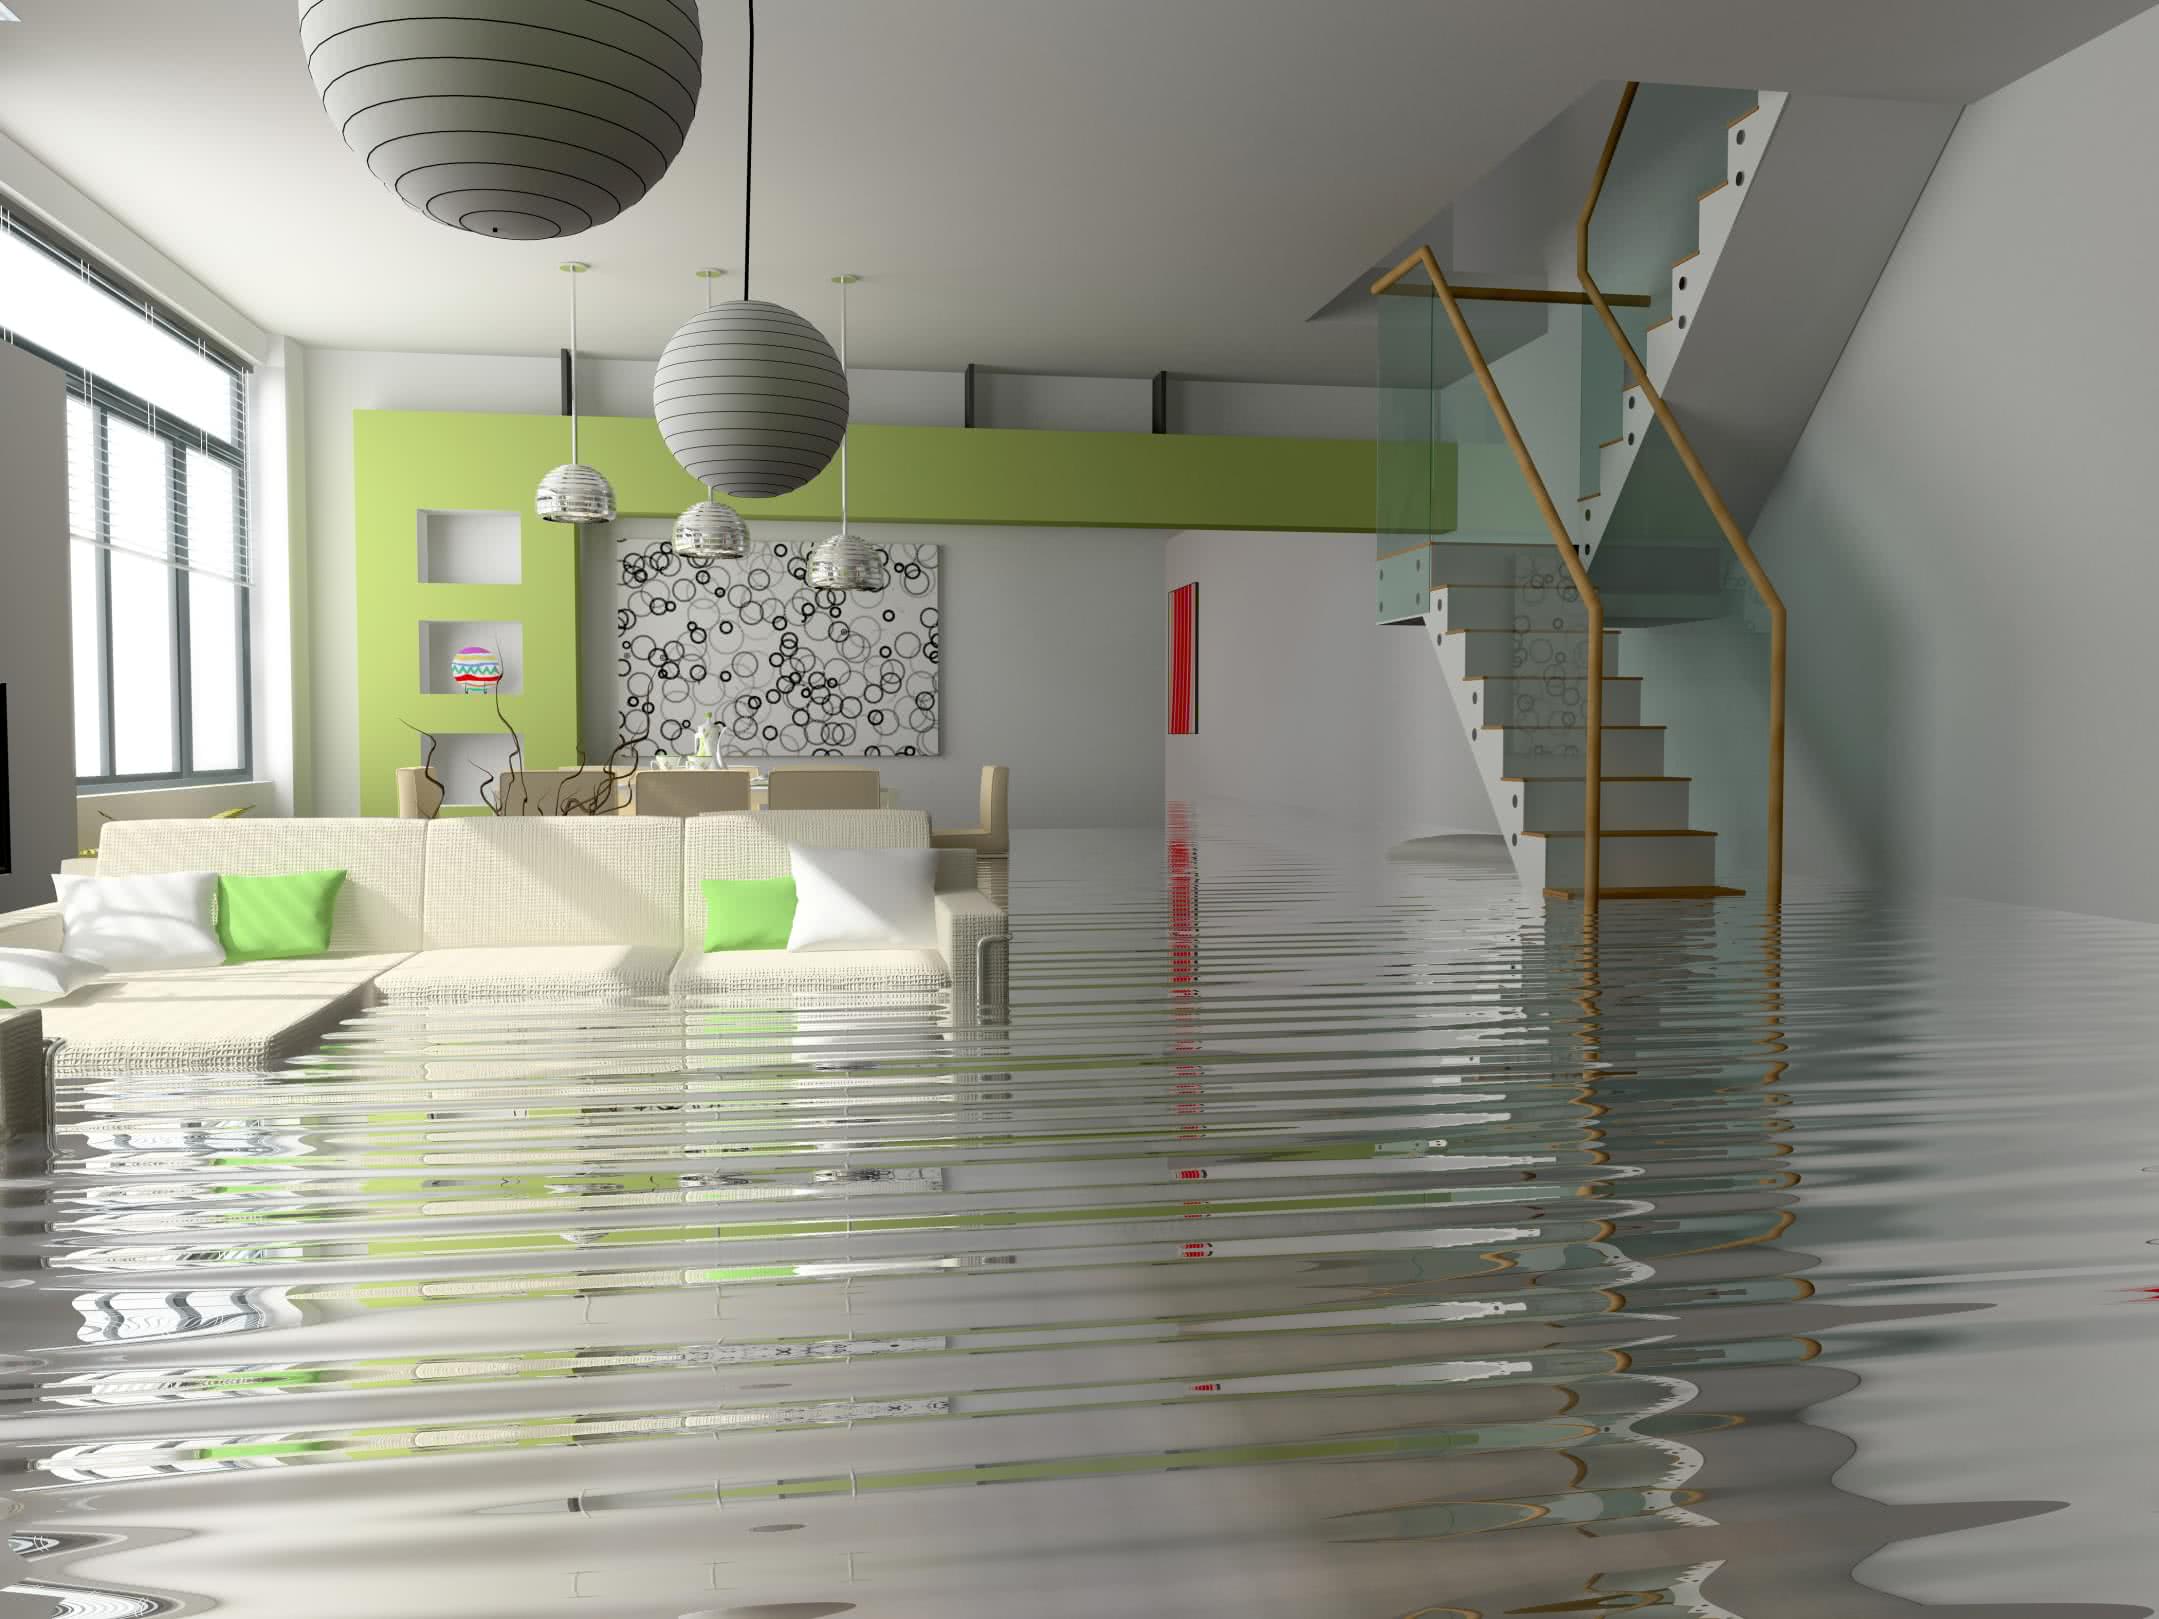 Protecting Your Holiday Home From Flood Damage